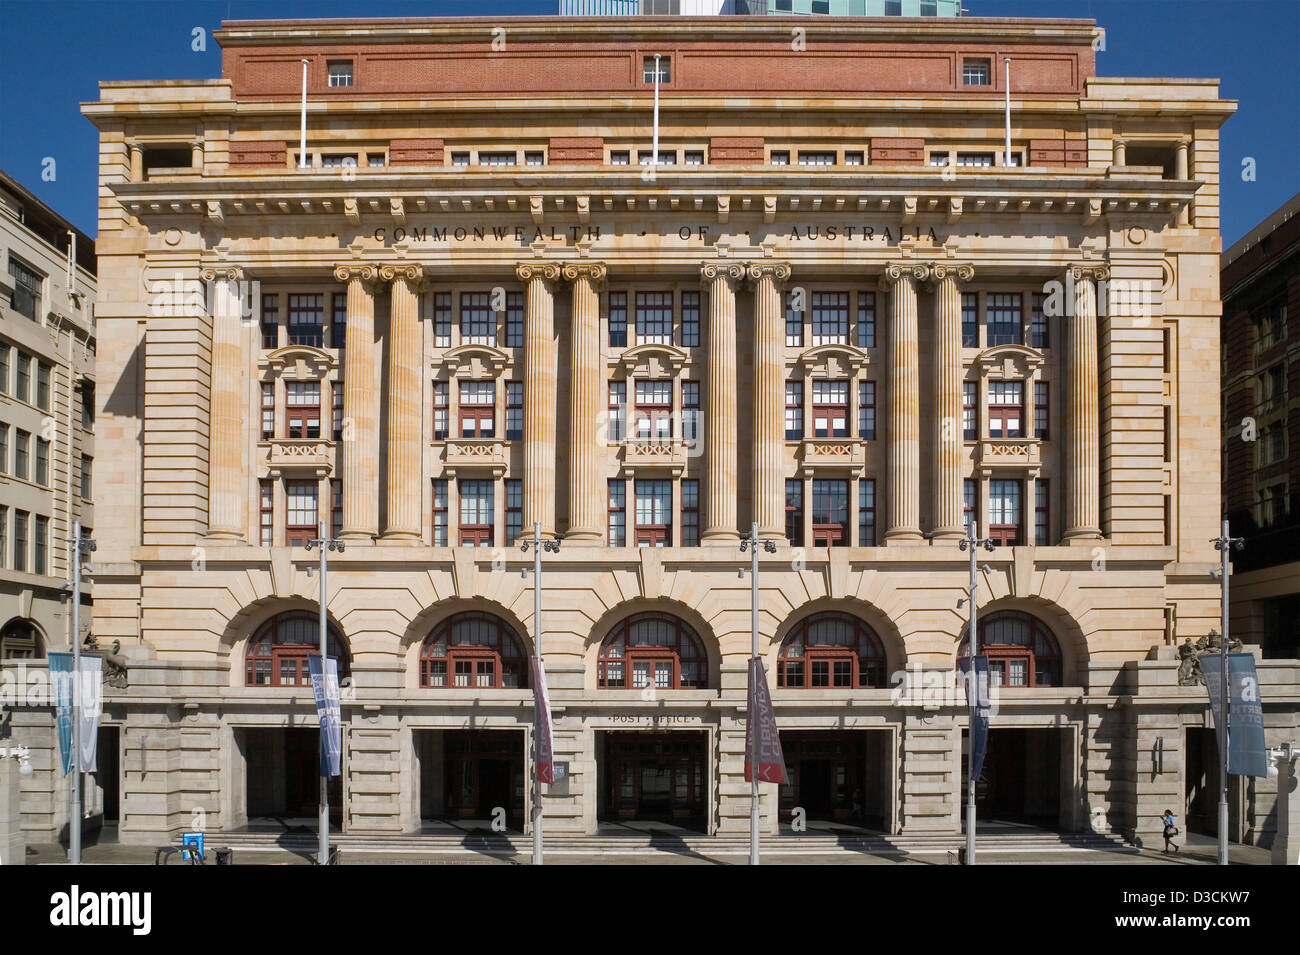 Front facade of the historical General Post Office building in Perth Western Australia. Stock Photo